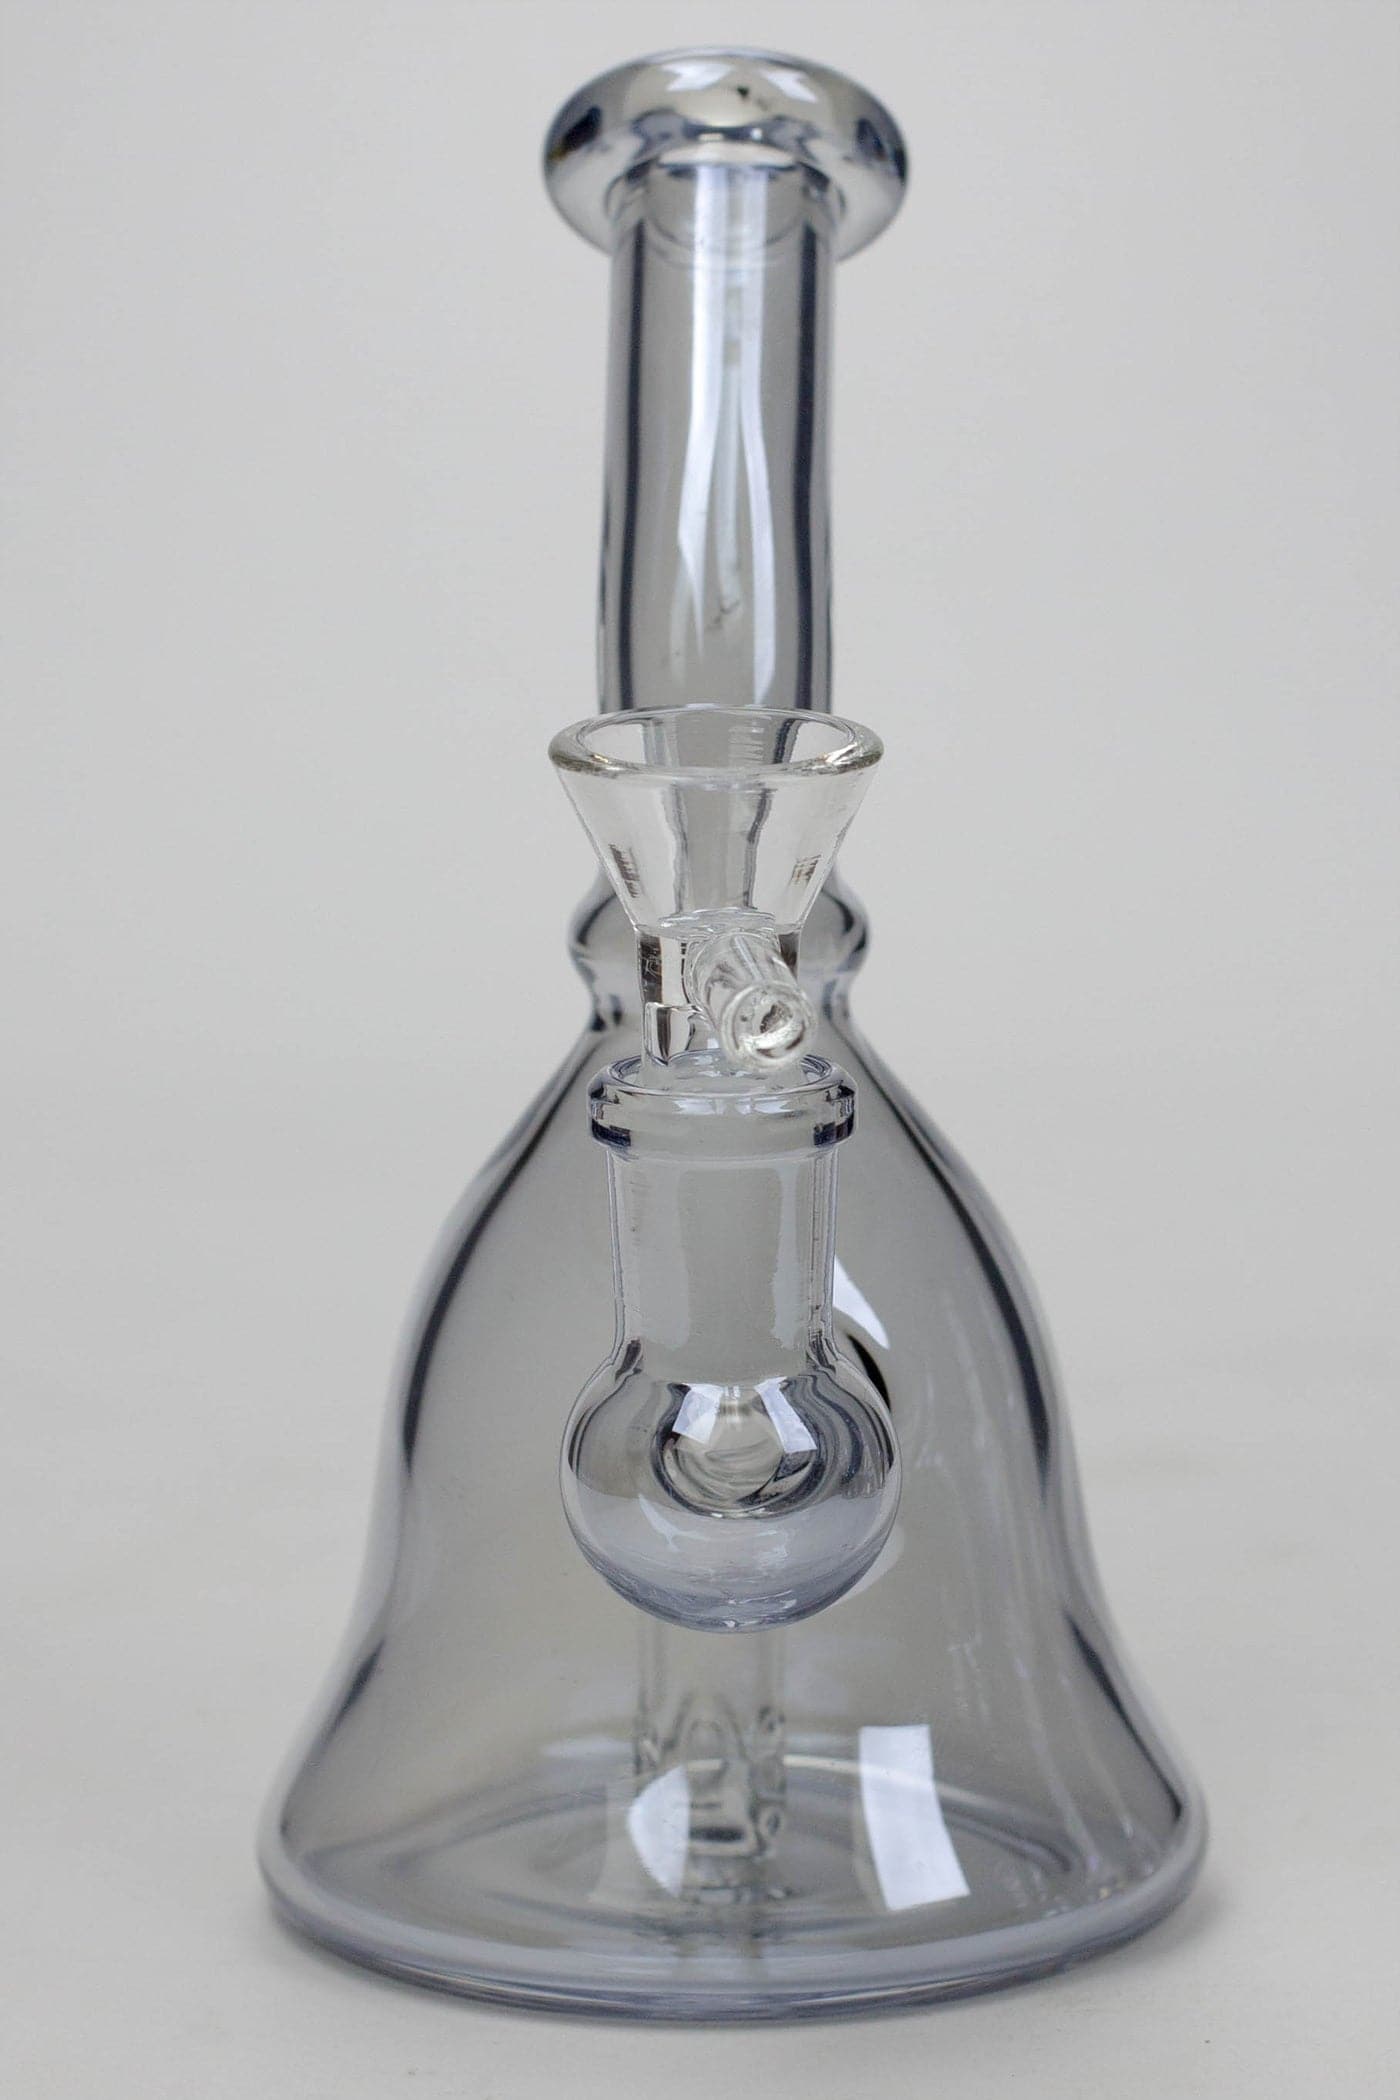 Fixed 3 hole diffuser bell metallic tinted bubbler_13